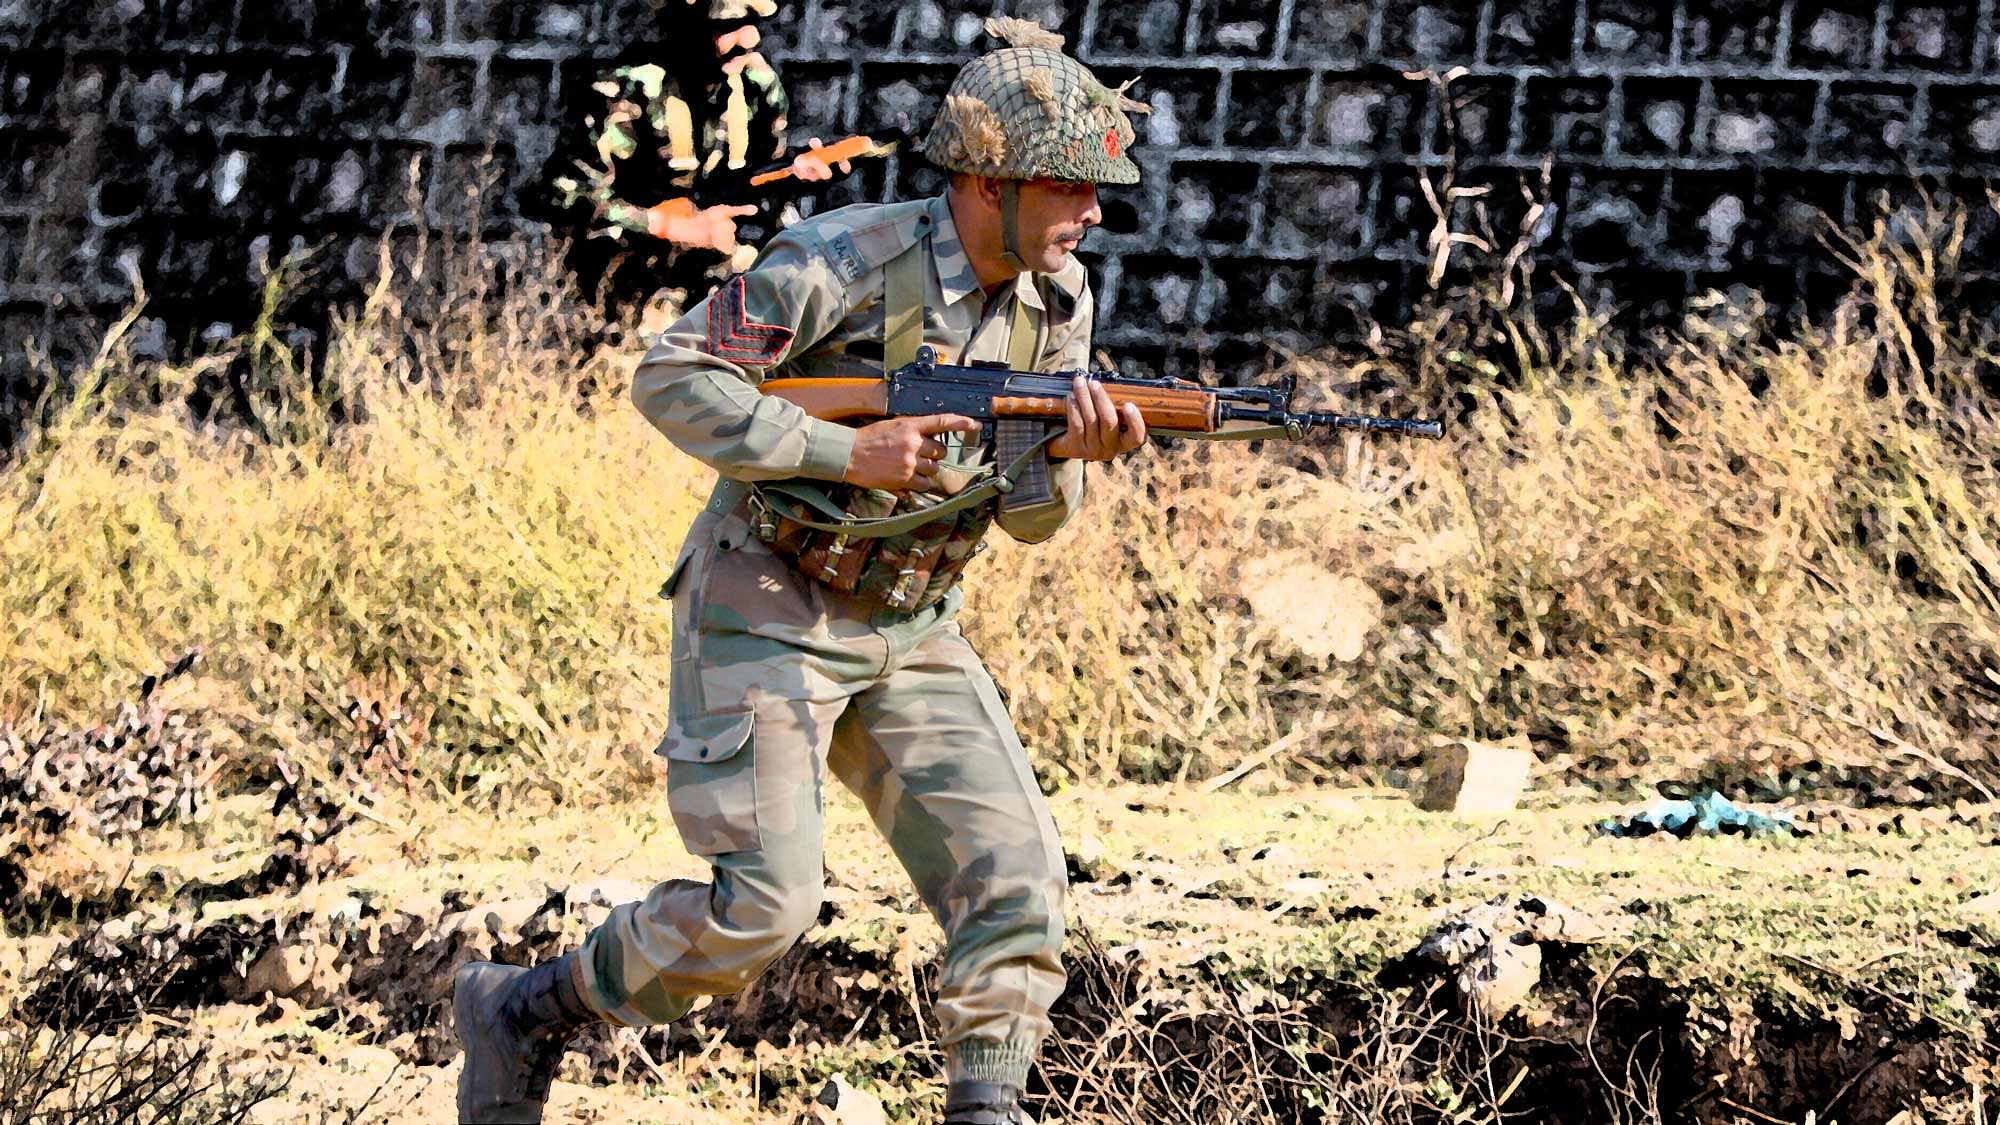 Soldiers conduct a search operation in a forest area outside the Pathankot air force base. (Photo: AP)